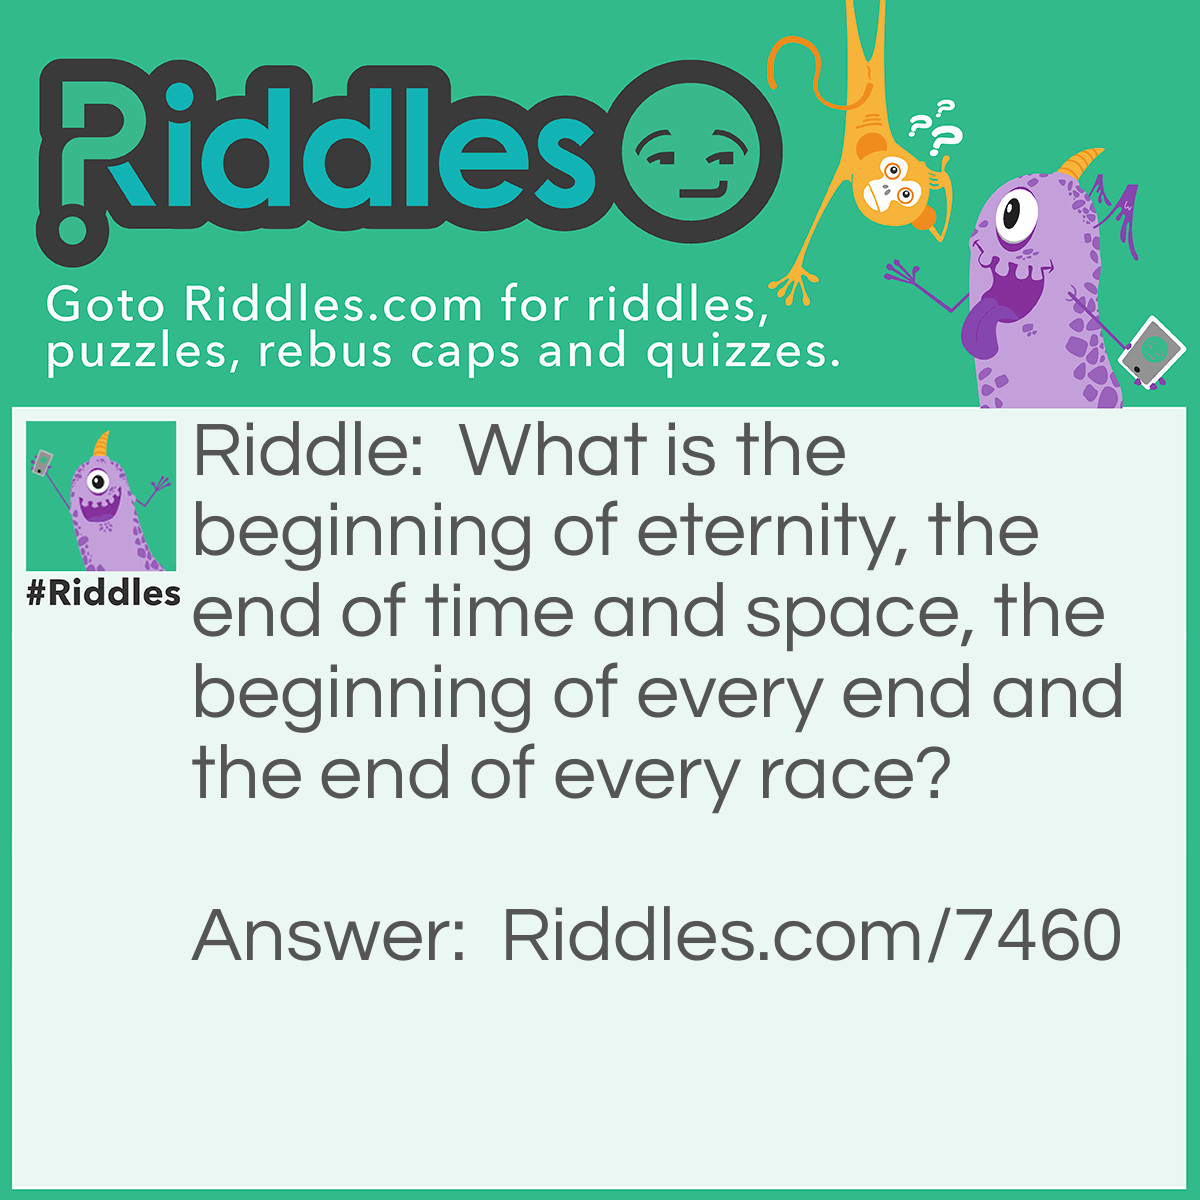 Riddle: What is the beginning of eternity, the end of time and space, the beginning of every end and the end of every race? Answer: The letter E.